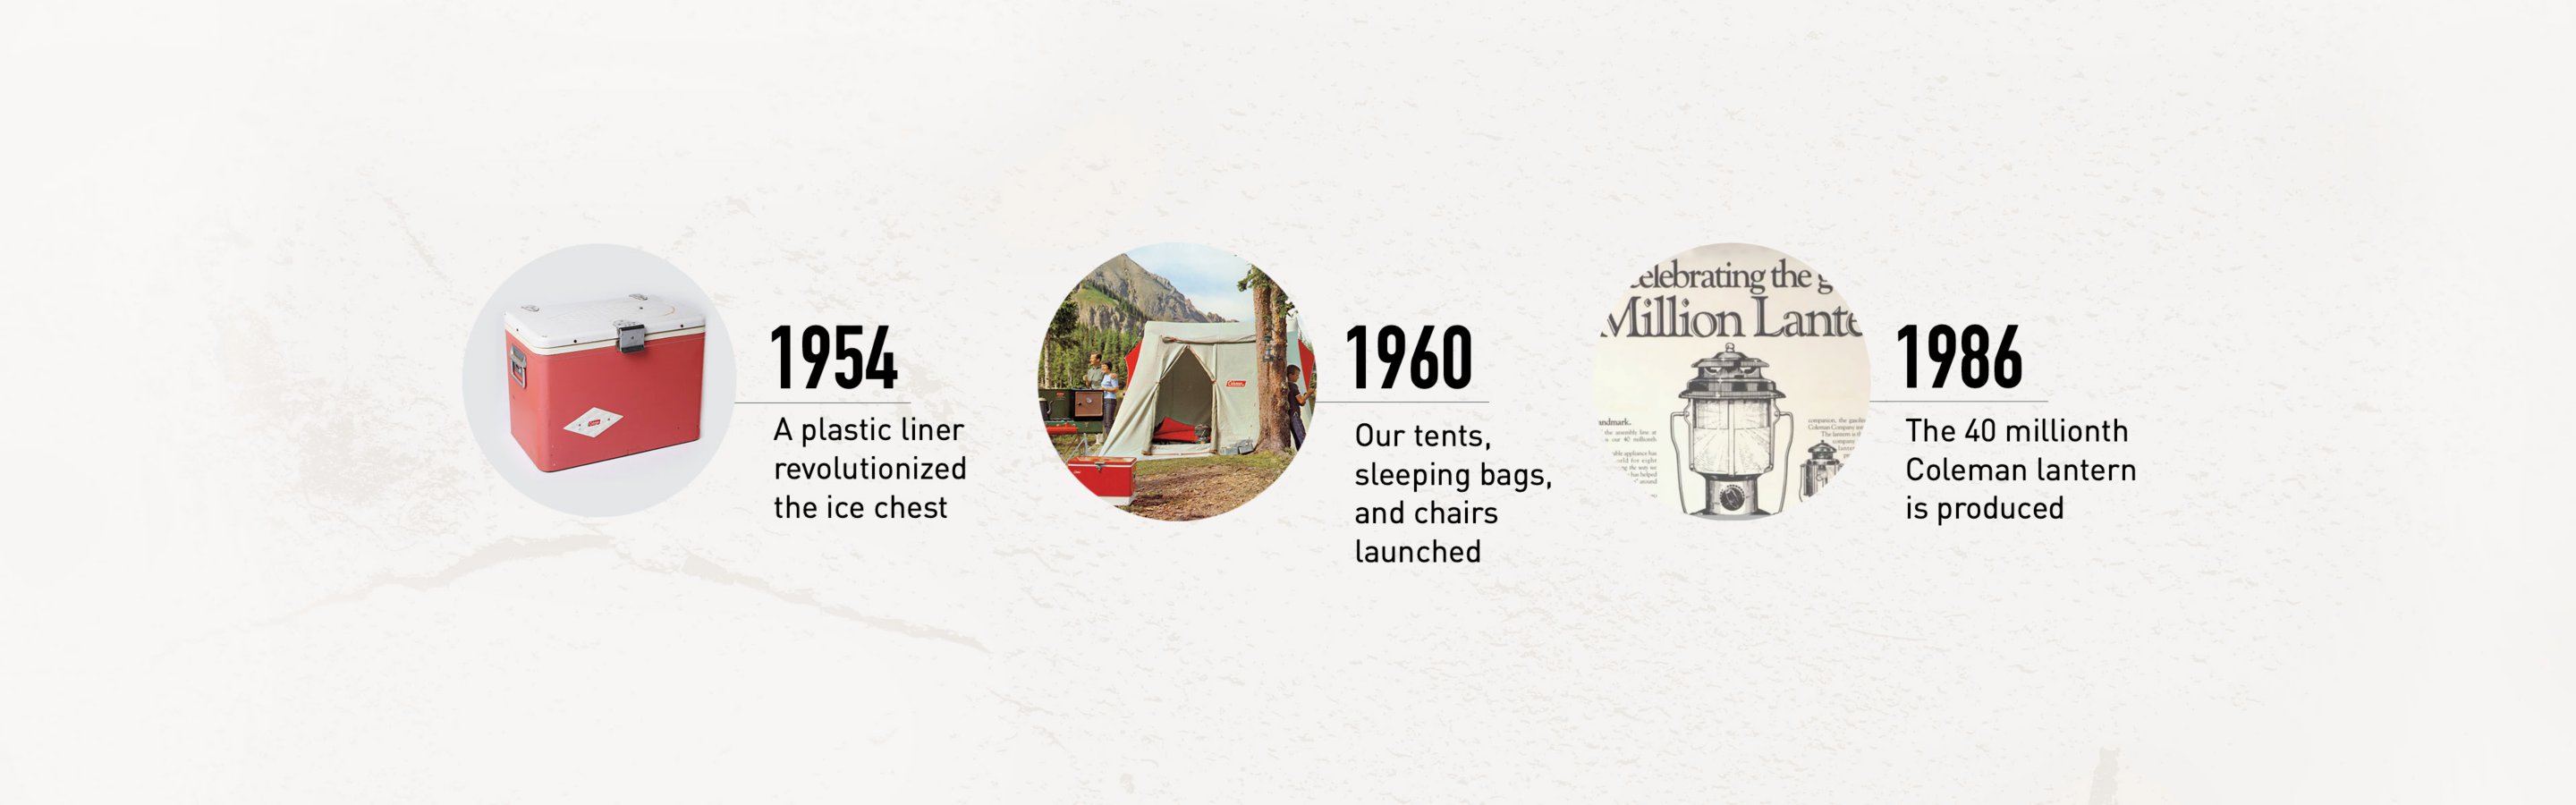 Timeline - 1954 ice chest launch, 1960 tents, sleeping bags and chairs launched, 1986 40 million lanterns made